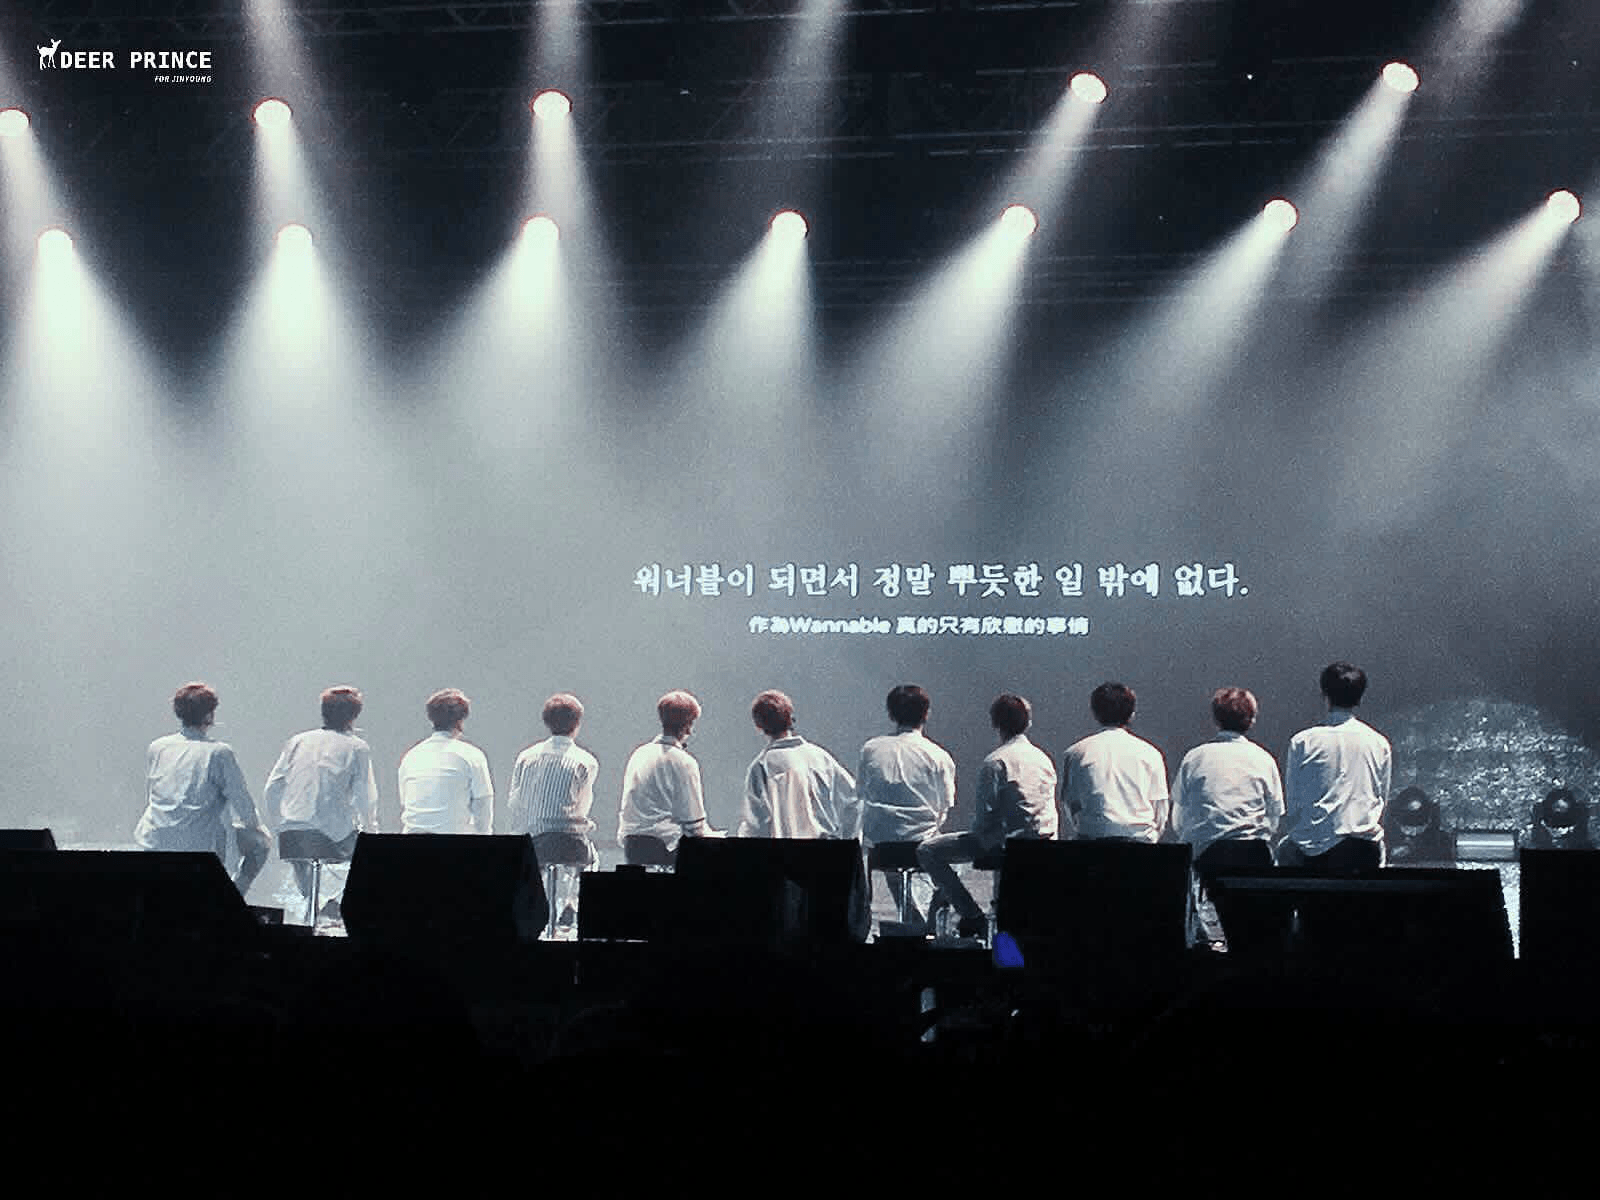 Too successful, WANNA ONE will not disband in 2018 as planned?